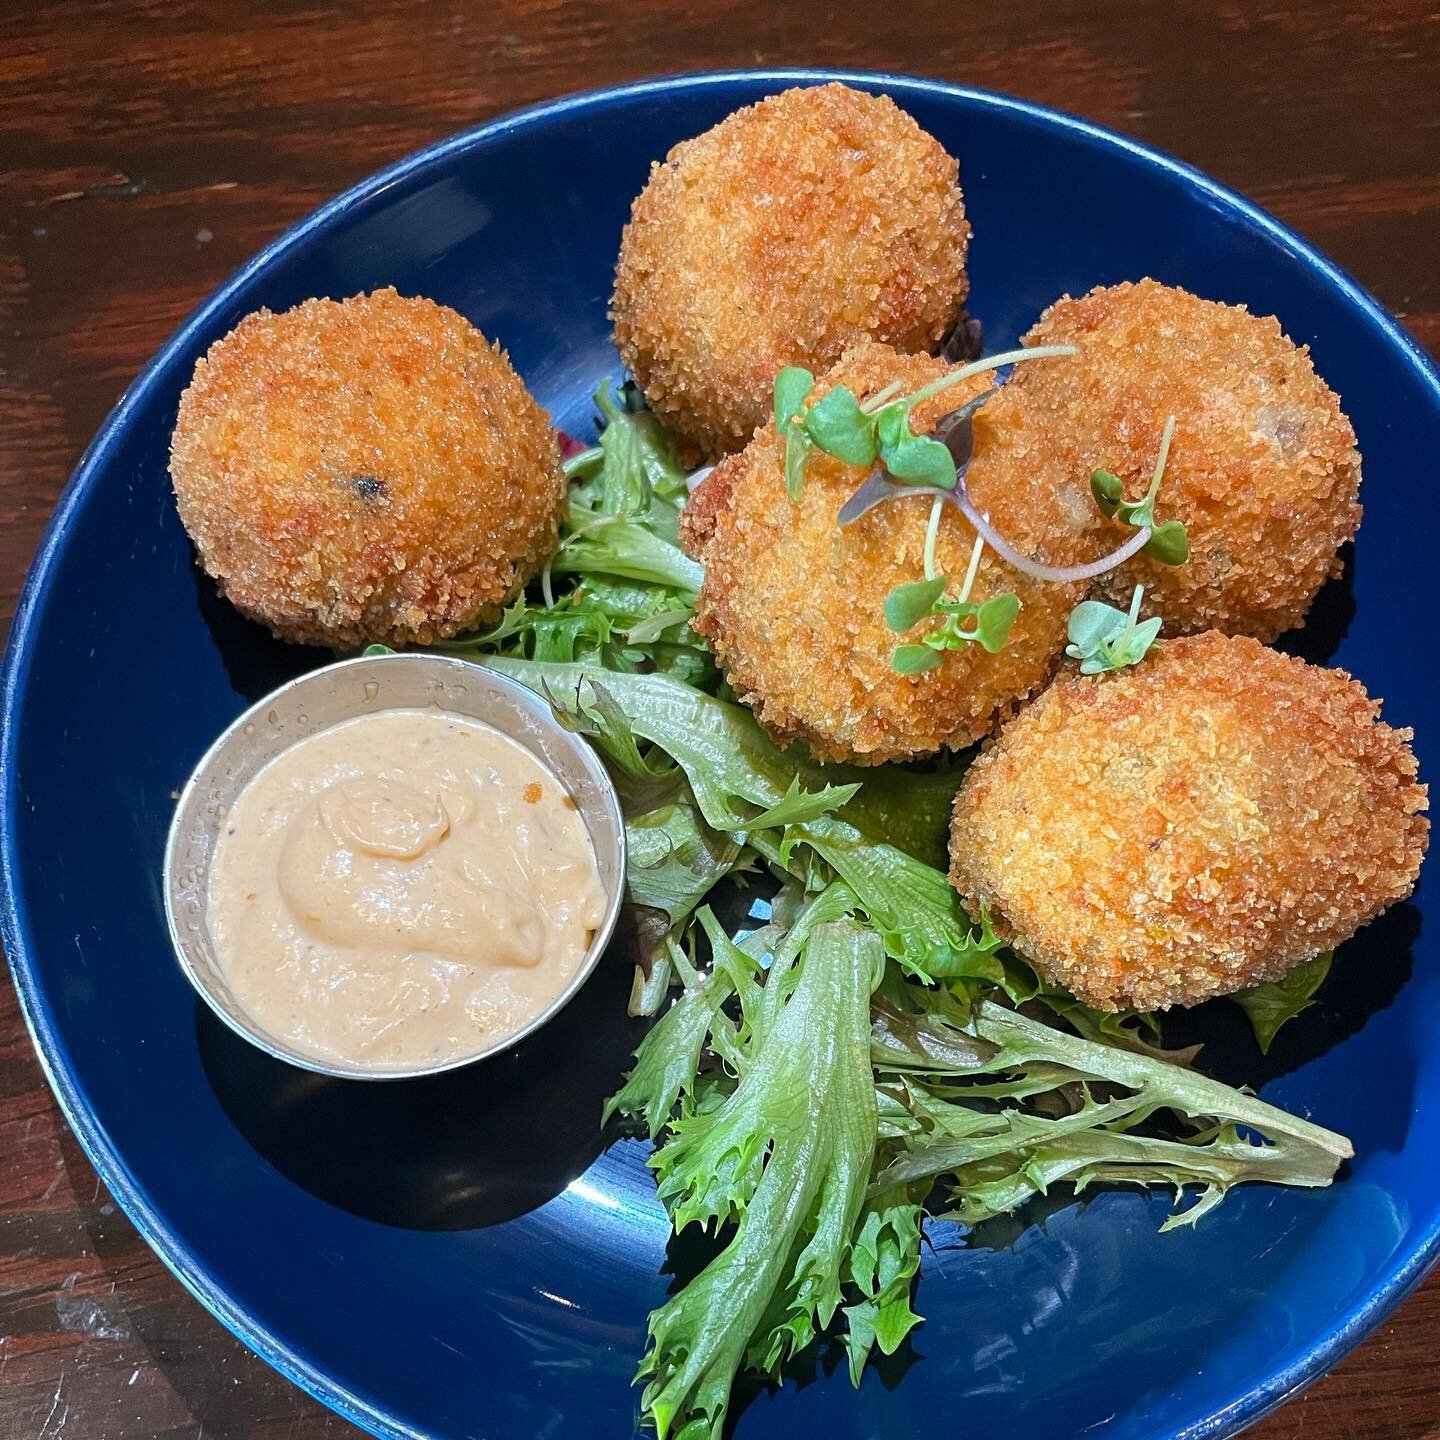 Todays Specials!

Dirty rice arancini with spicy tomato aioli.

Grilled swordfish sandwich with spicy sundried tomato aioli, pickled onions, mixed greens and local avocado on Hokkaido milk bun.